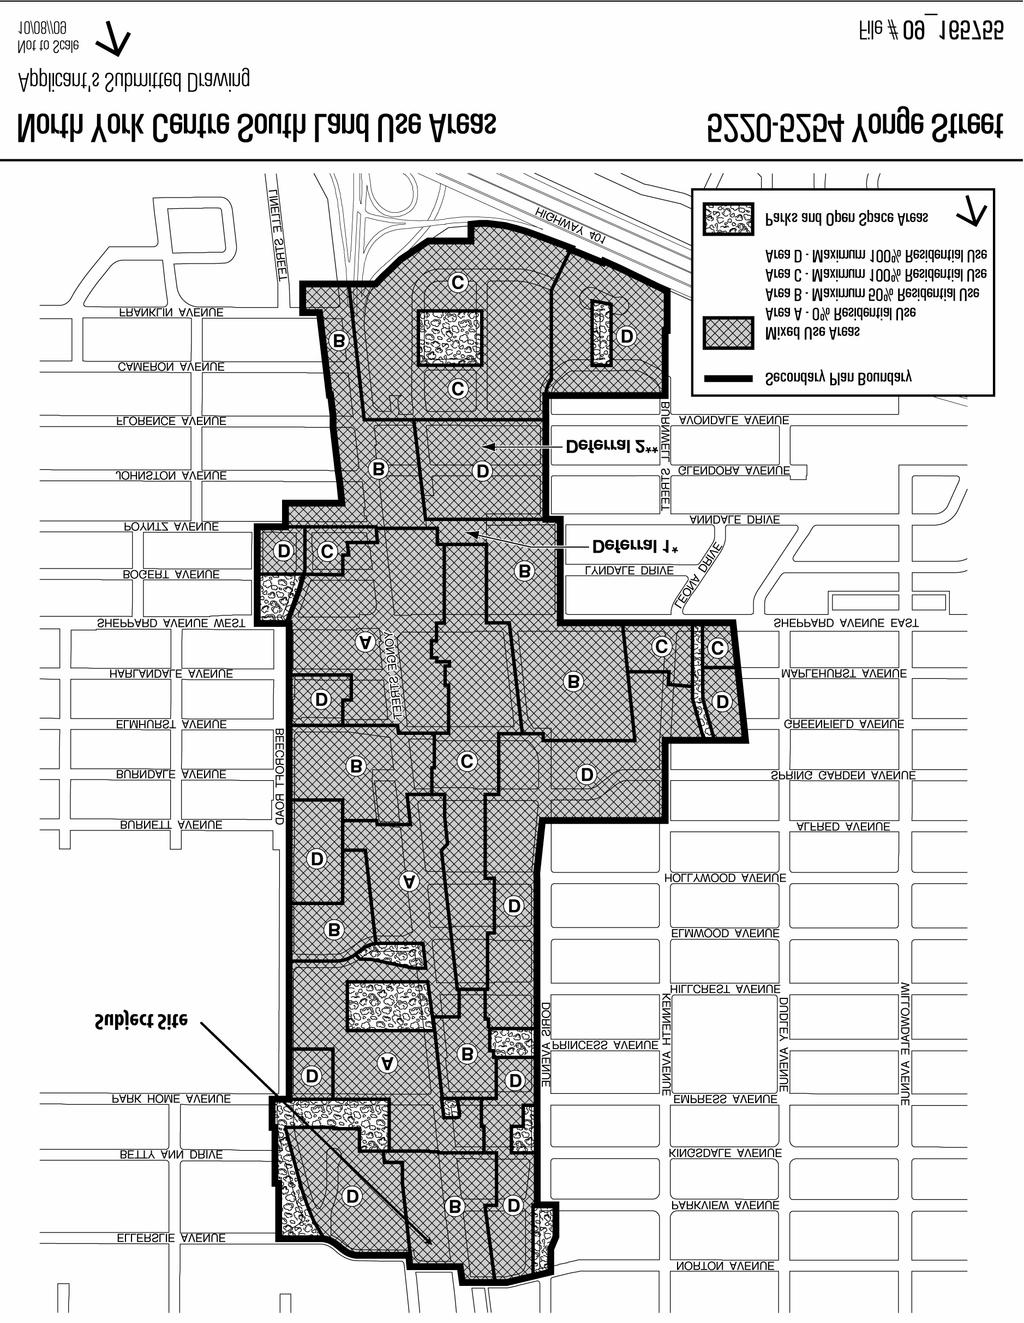 Attachment 8: Official Plan North York Centre Secondary Plan Land Use